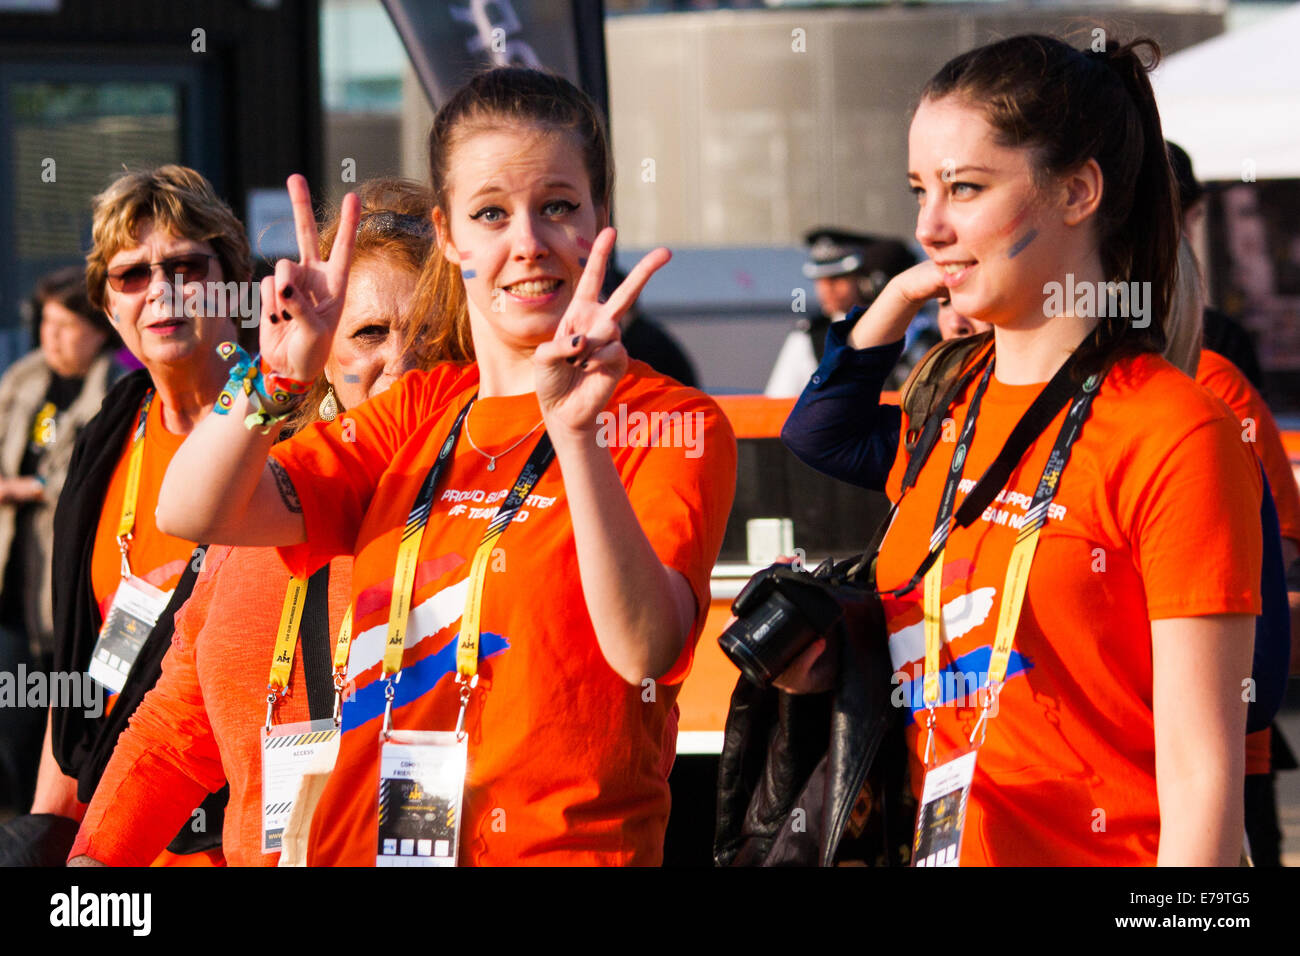 Queen Elizabeth Olympic Park, London, UK. 10th Sep, 2014. Dutch supporters heaf for the opening ceremony for the Invictus Games, where over 400 competitors from 13 nations will take part in an international sporting event for wounded, injured and sick Servicemen and women. Credit:  Paul Davey/Alamy Live News Stock Photo